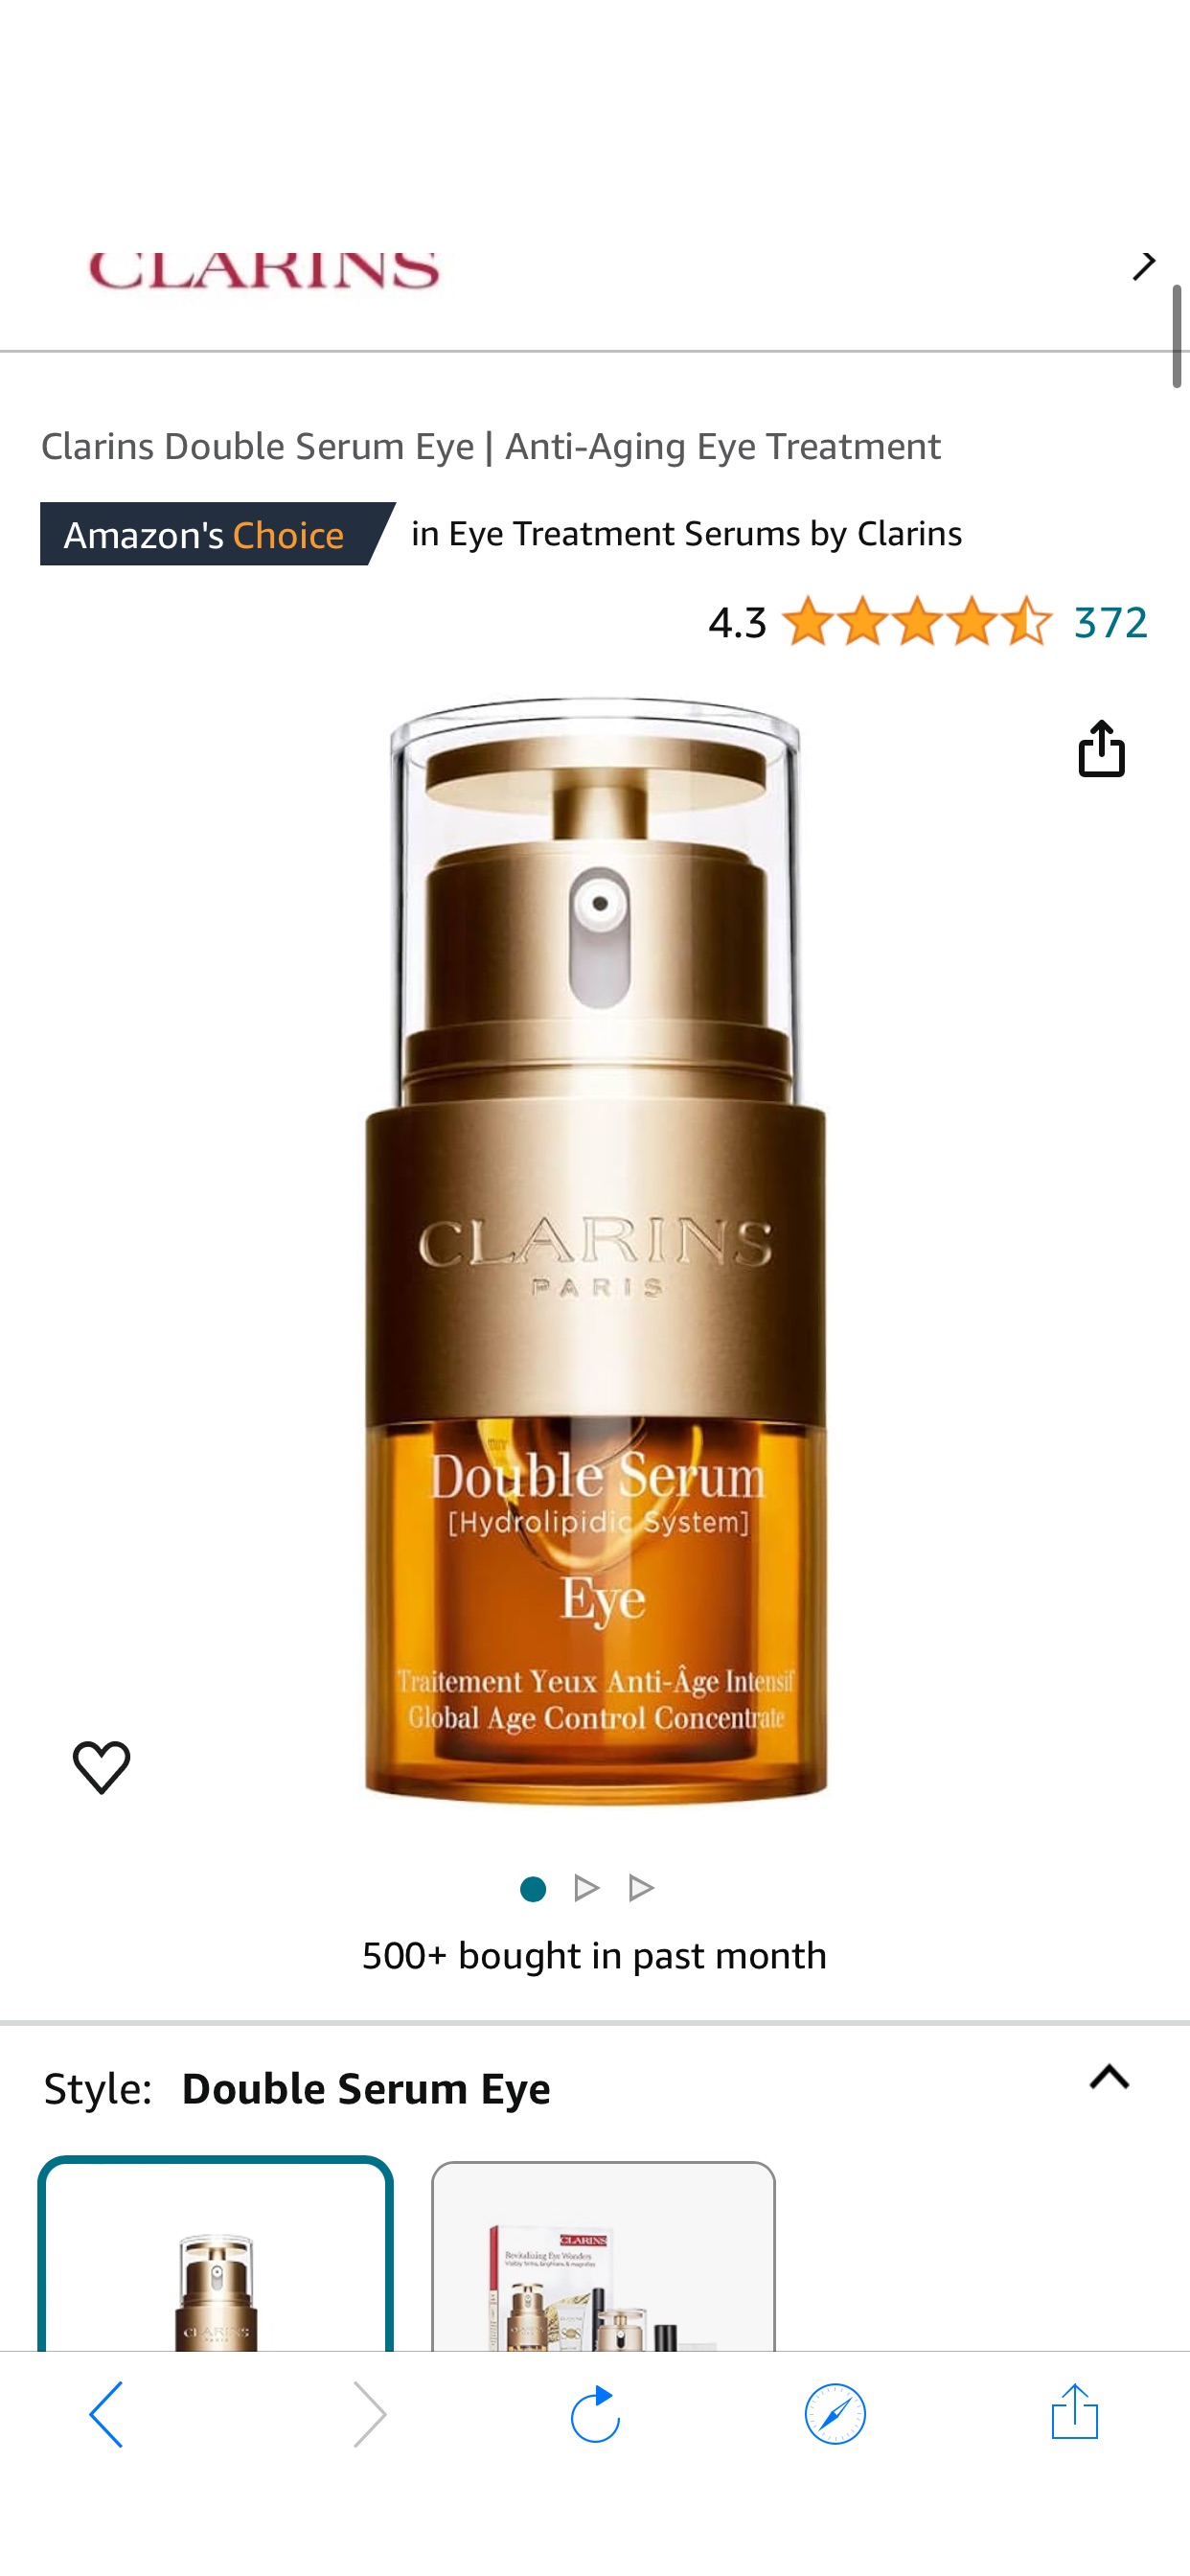 Amazon.com: Clarins Double Serum Eye | Anti-Aging Eye Treatment | Visibly Smoothes, Firms, Hydrates and Revitalizes For More Youthful-Looking Eyes In Just 7 Days* | 13 Plant Extracts, Including Turmer